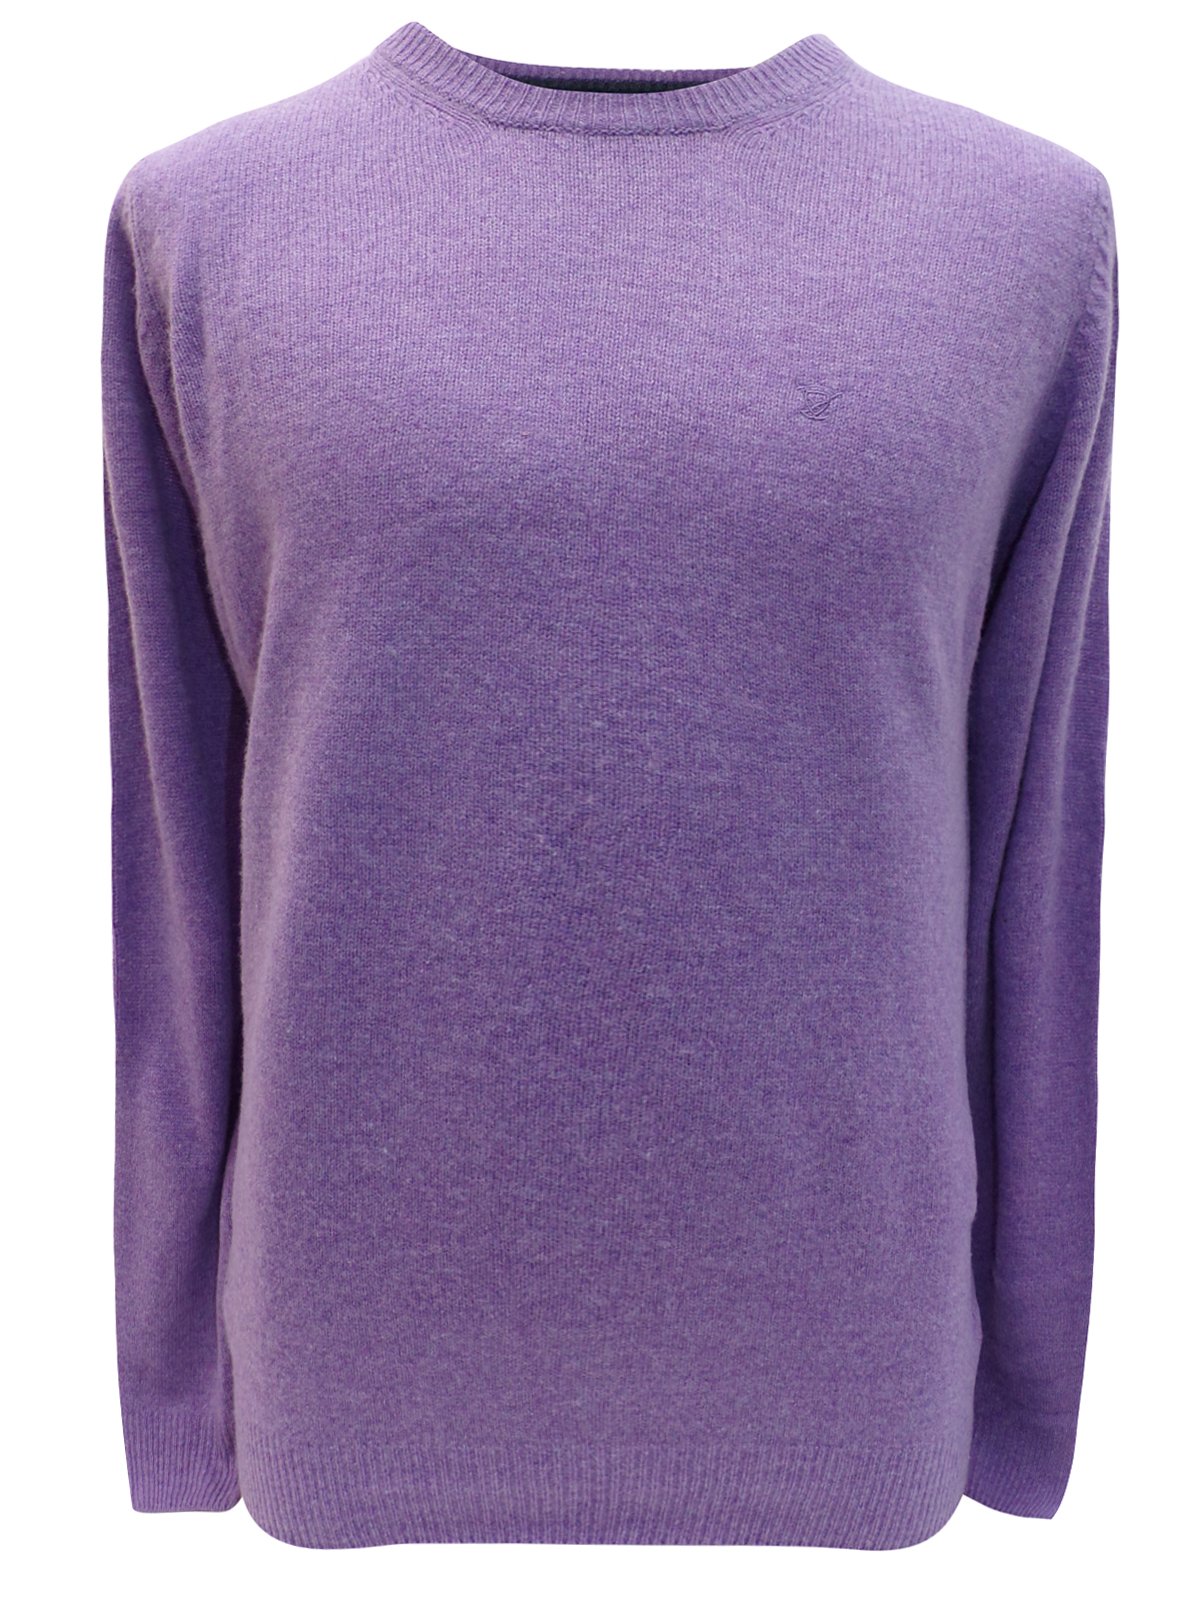 James Pringle - - James Pringle LILAC Pure Wool Crew Neck Knitted ...